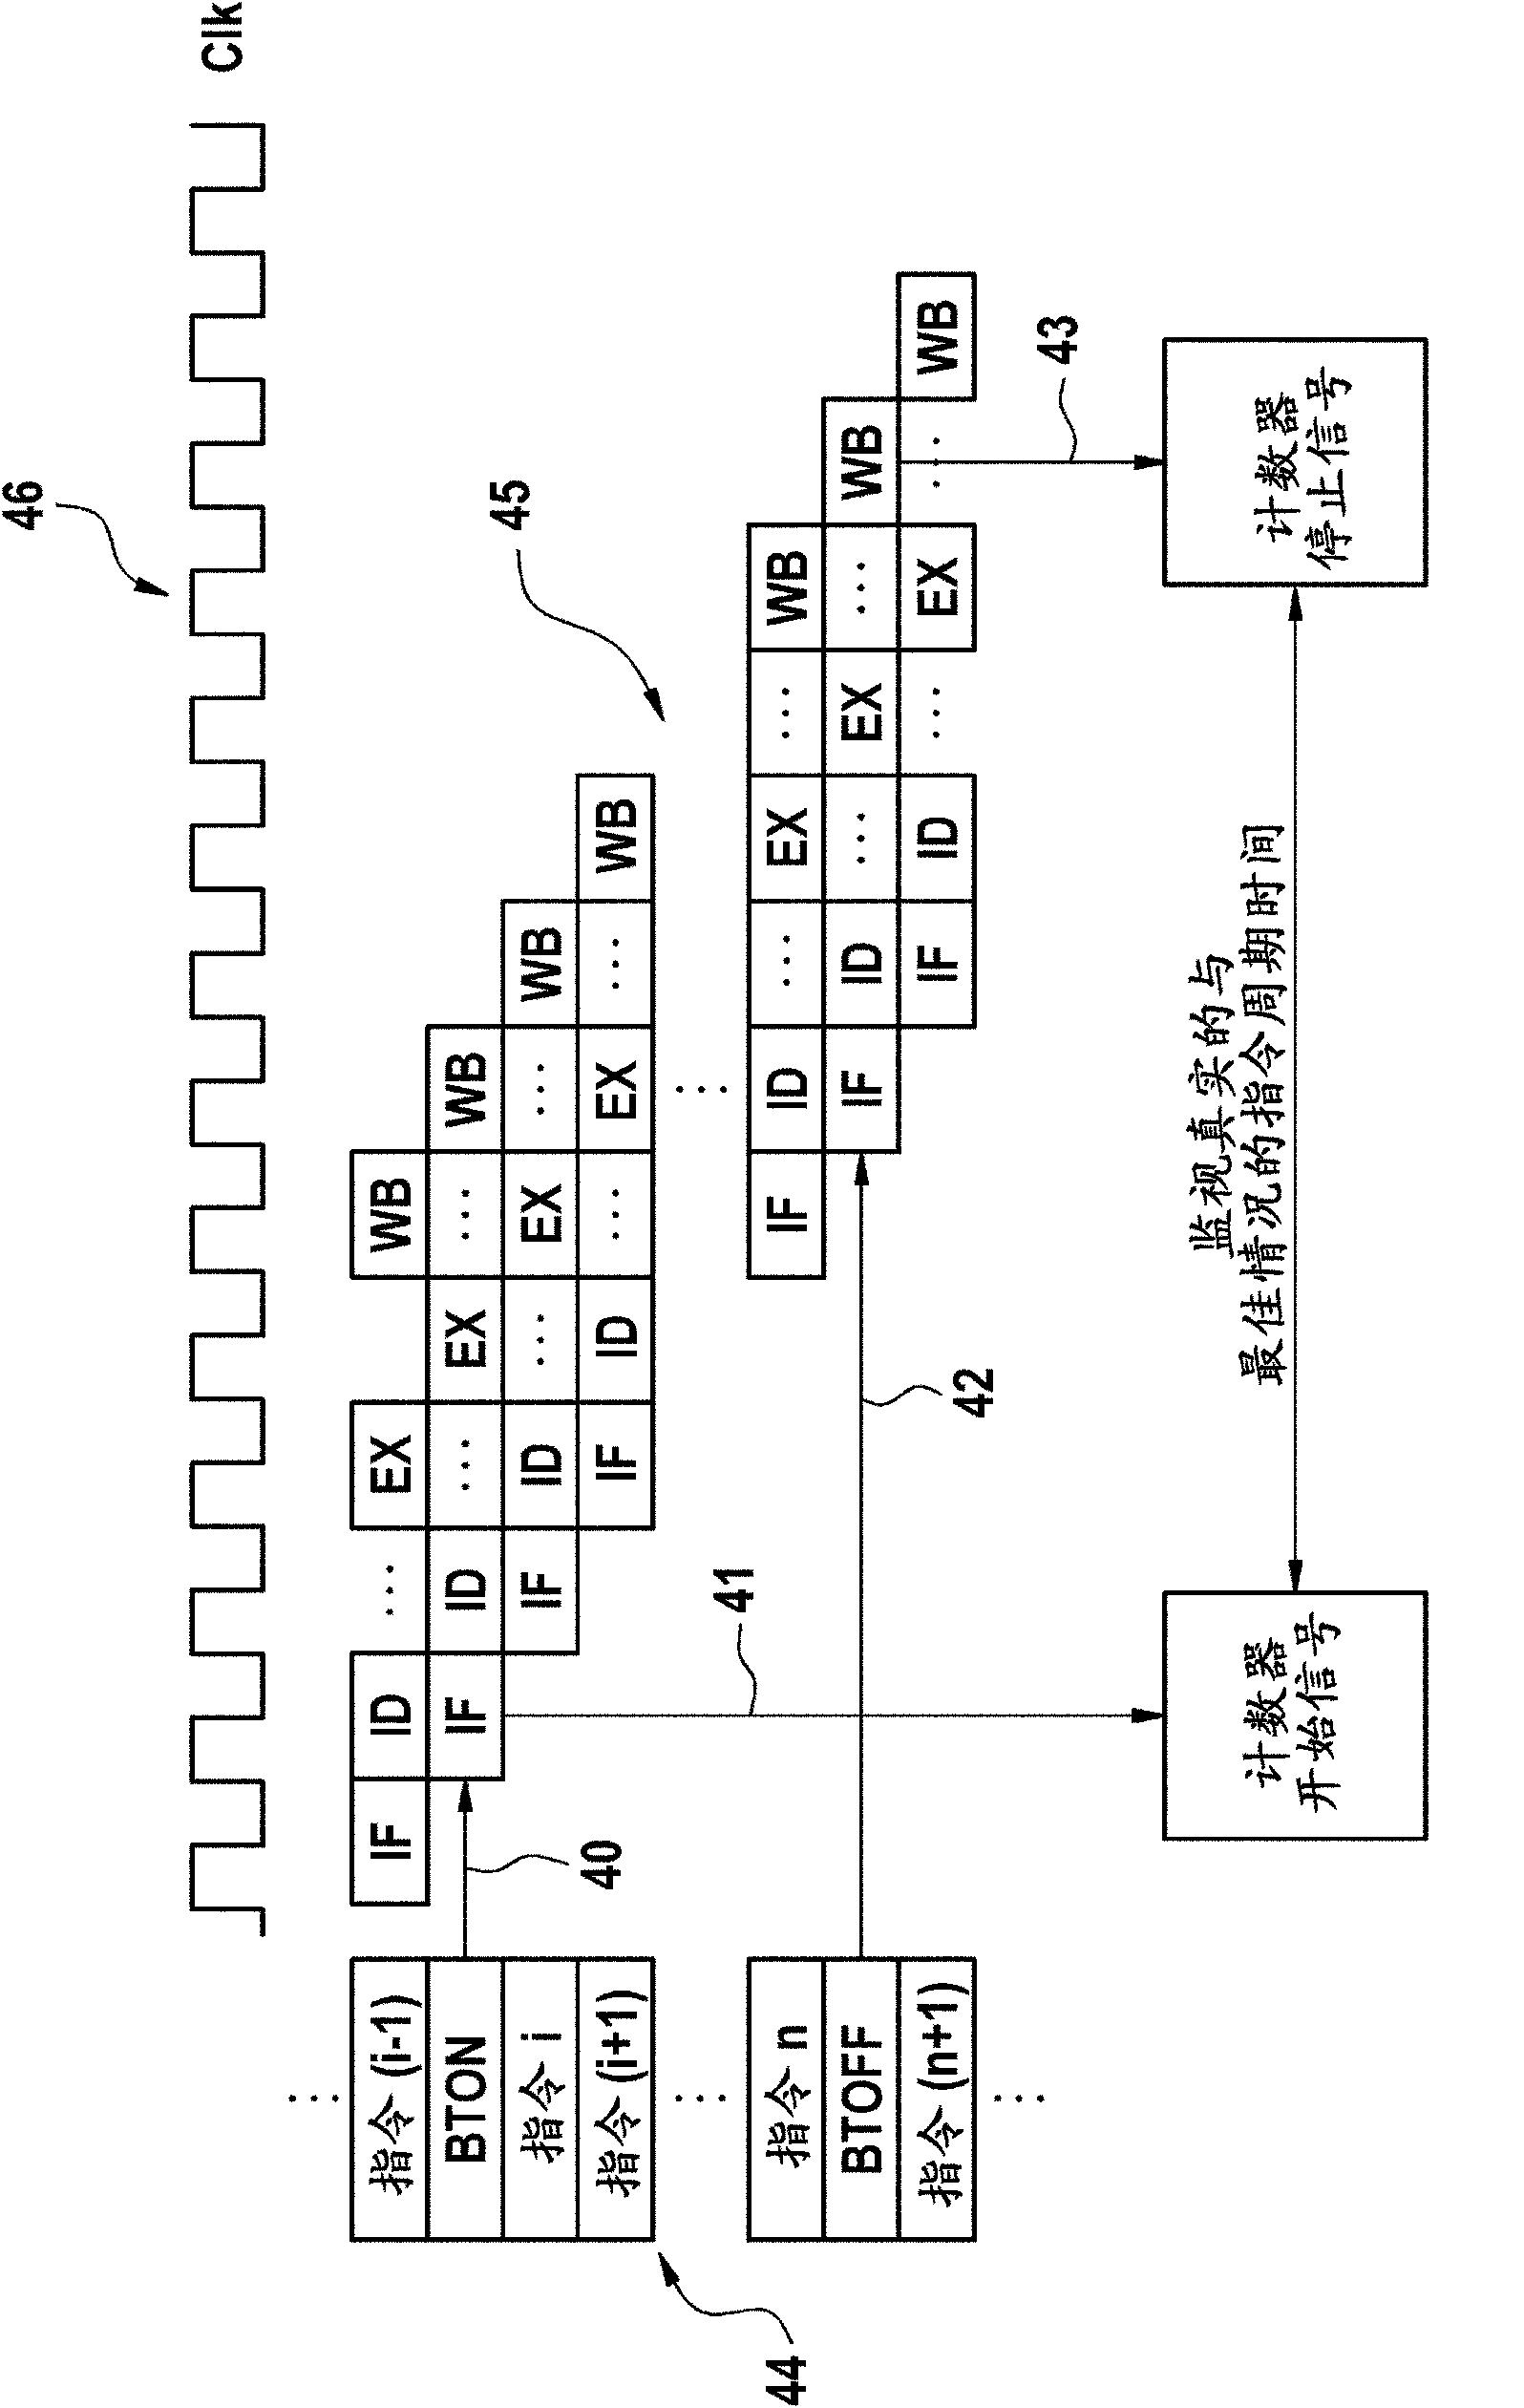 Microprocessor with pipeline bubble detection device